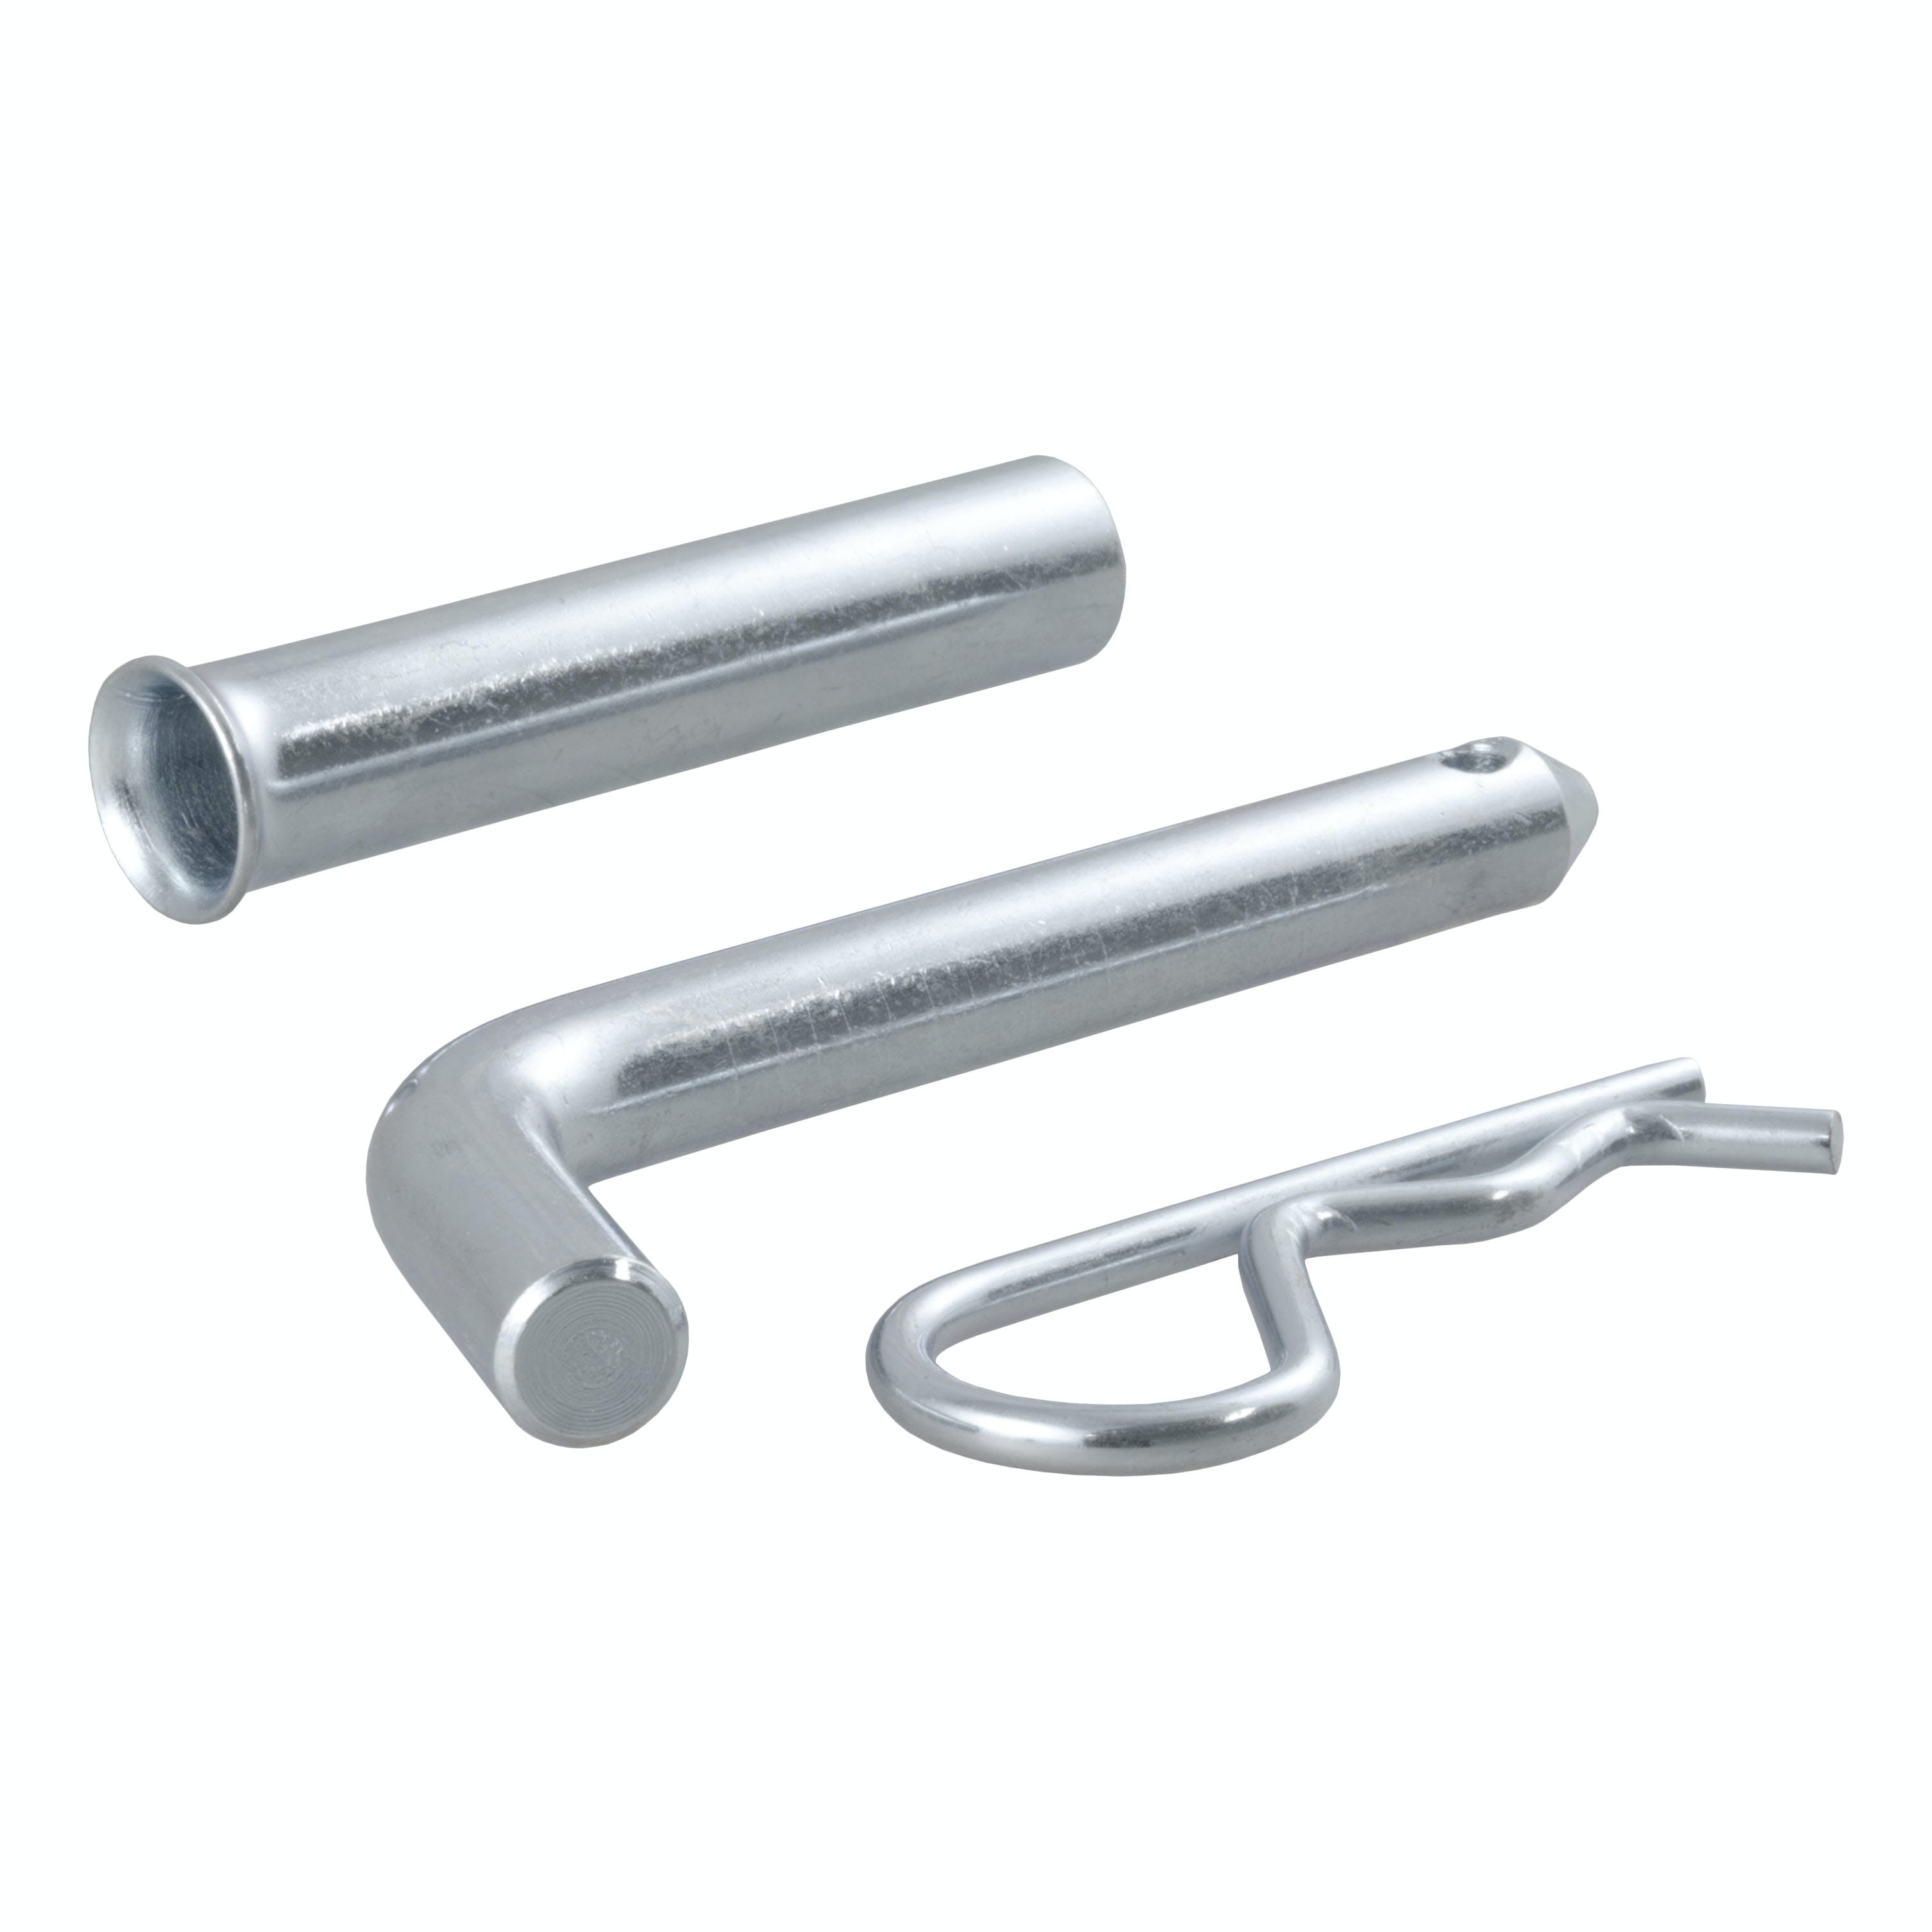 CURT 21502 1/2 Hitch Pin with 5/8 Adapter (1-1/4 or 2 Receiver, Zinc, Packaged)